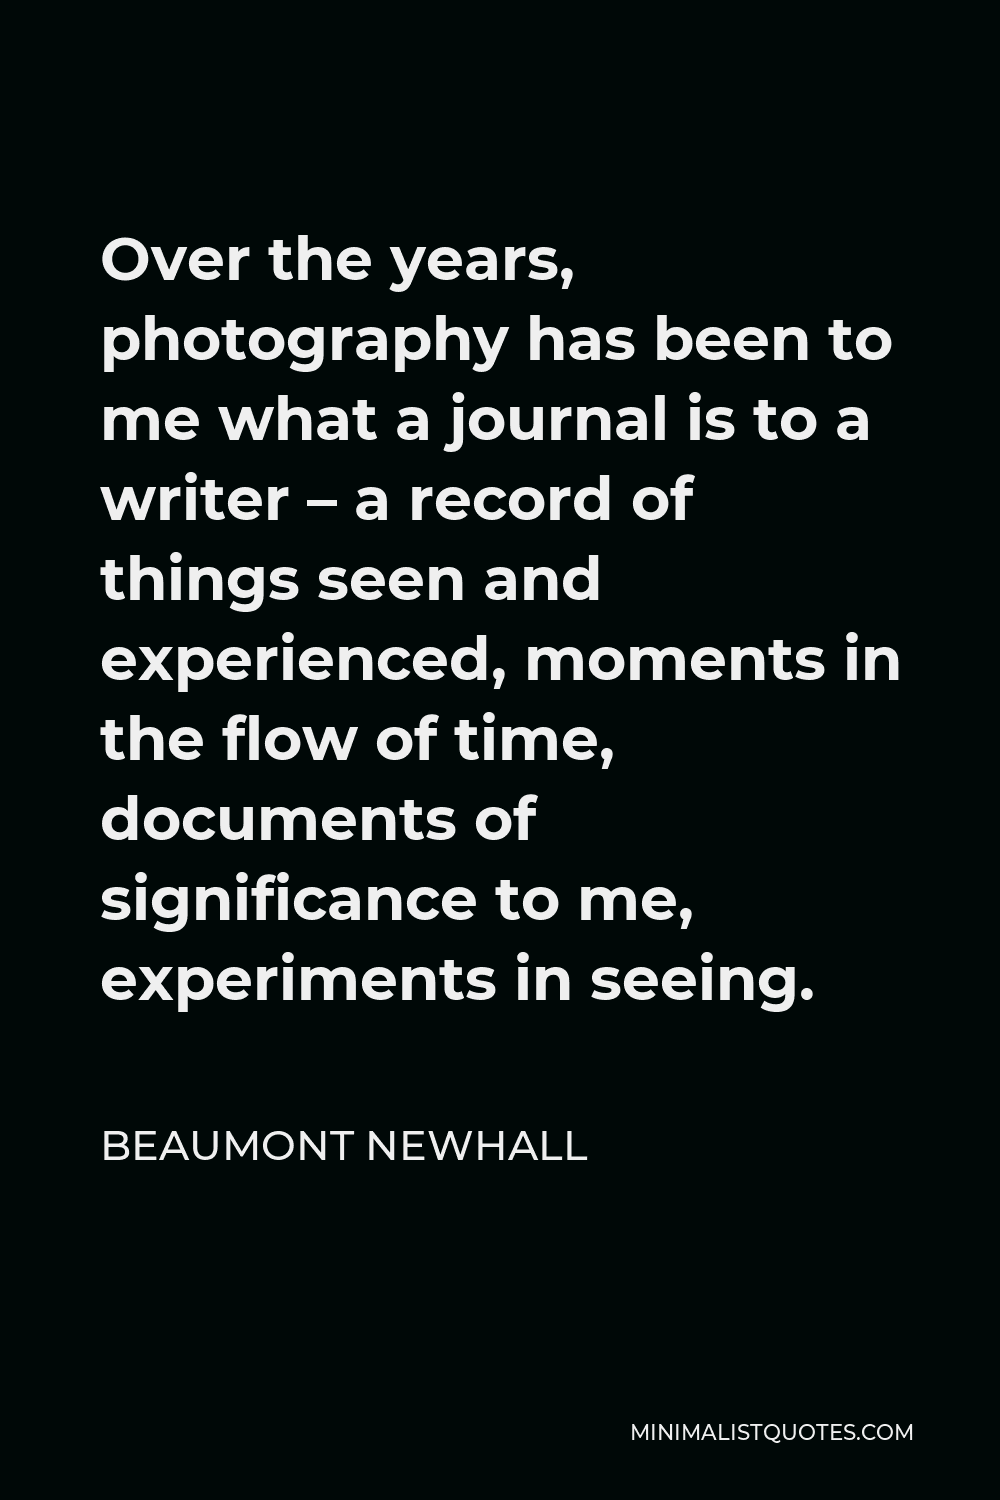 Beaumont Newhall Quote - Over the years, photography has been to me what a journal is to a writer – a record of things seen and experienced, moments in the flow of time, documents of significance to me, experiments in seeing.